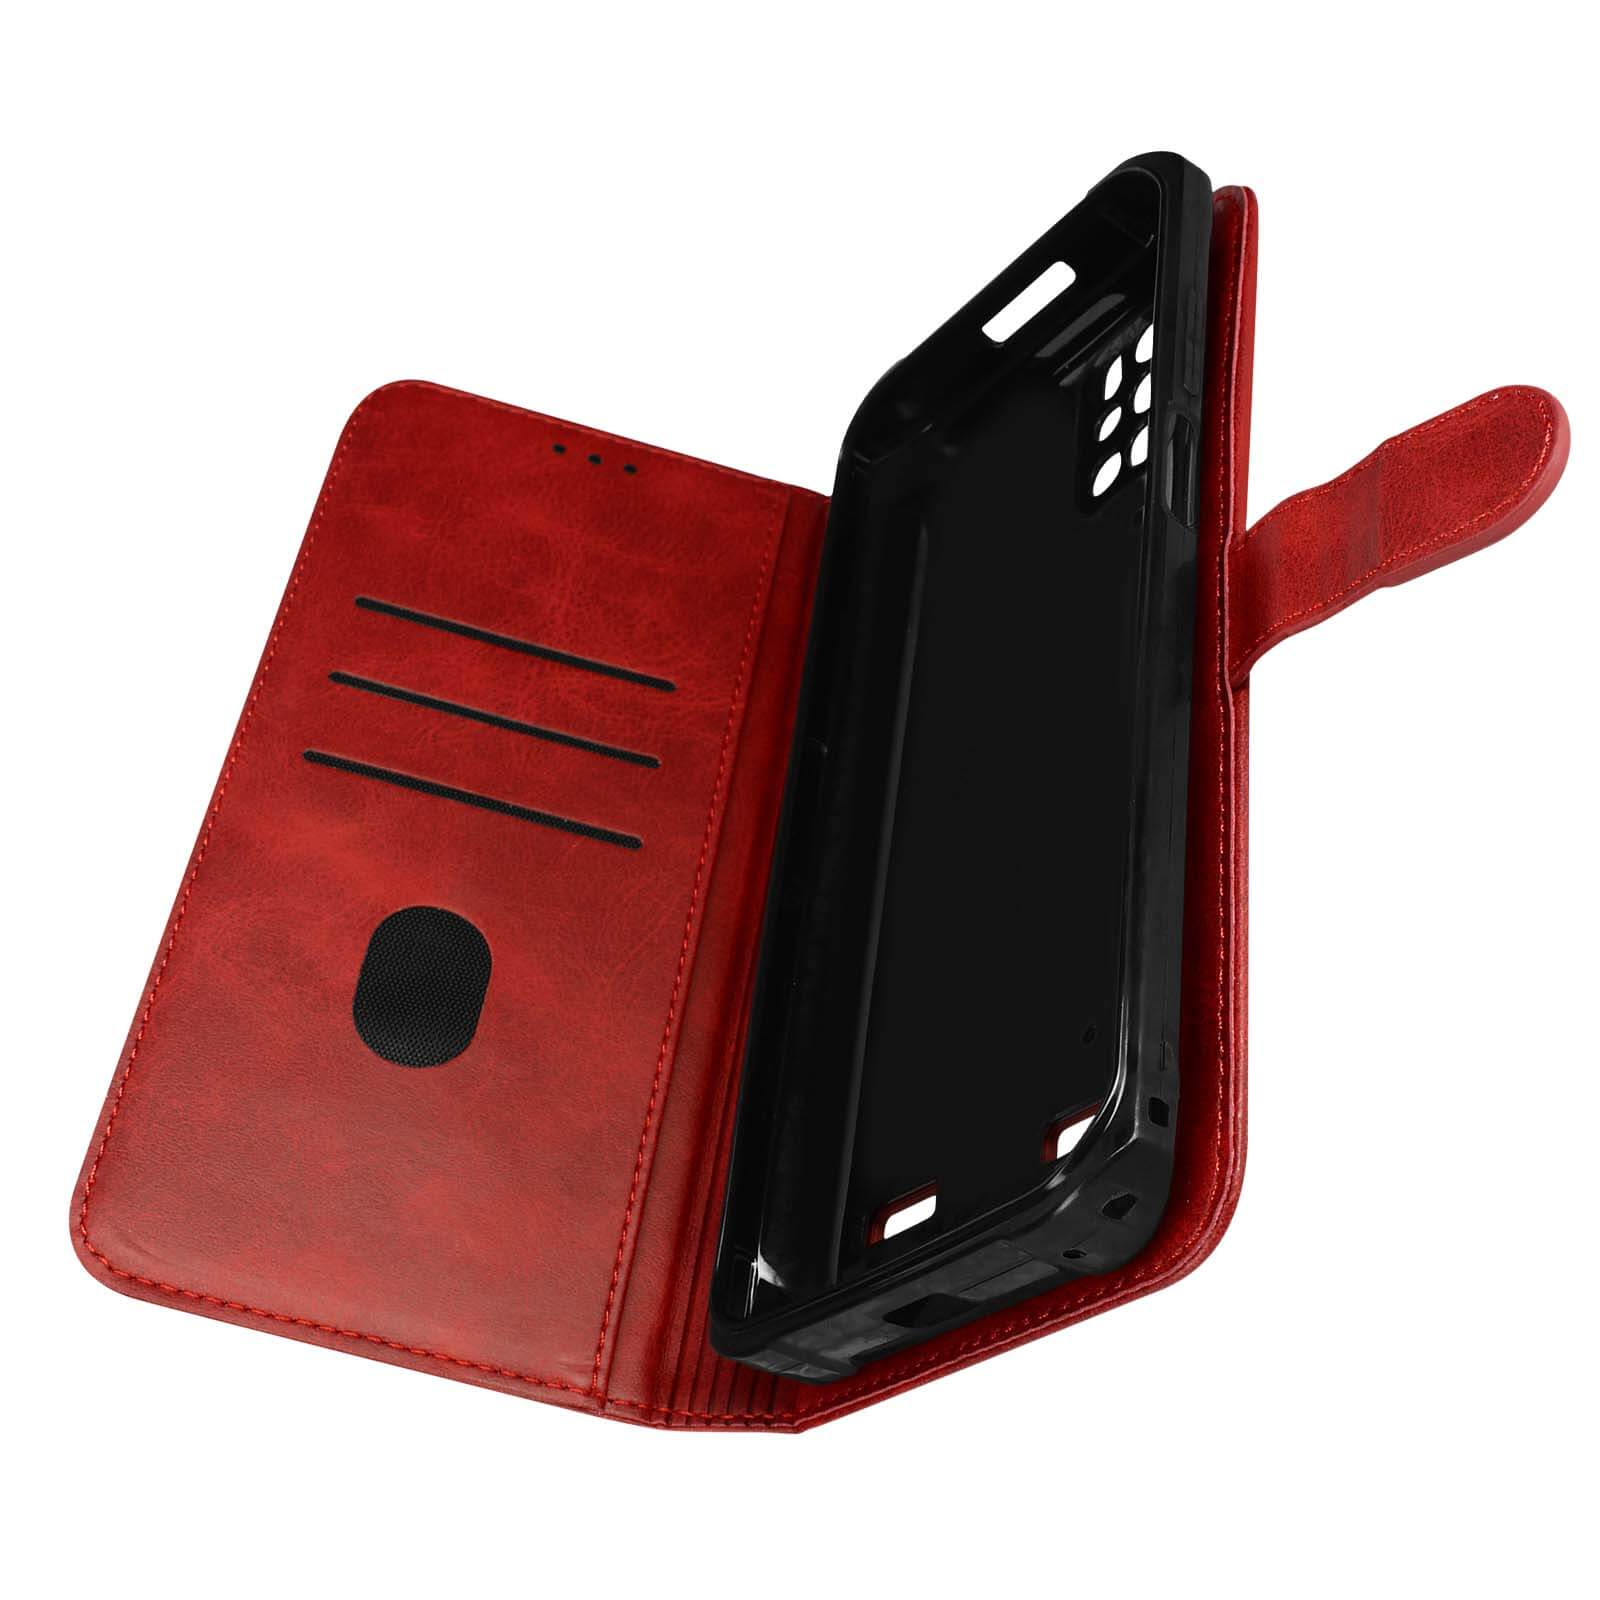 AVIZAR Rot 5G, Bookstyle Bookcover, Armor Series, Ulefone, 12